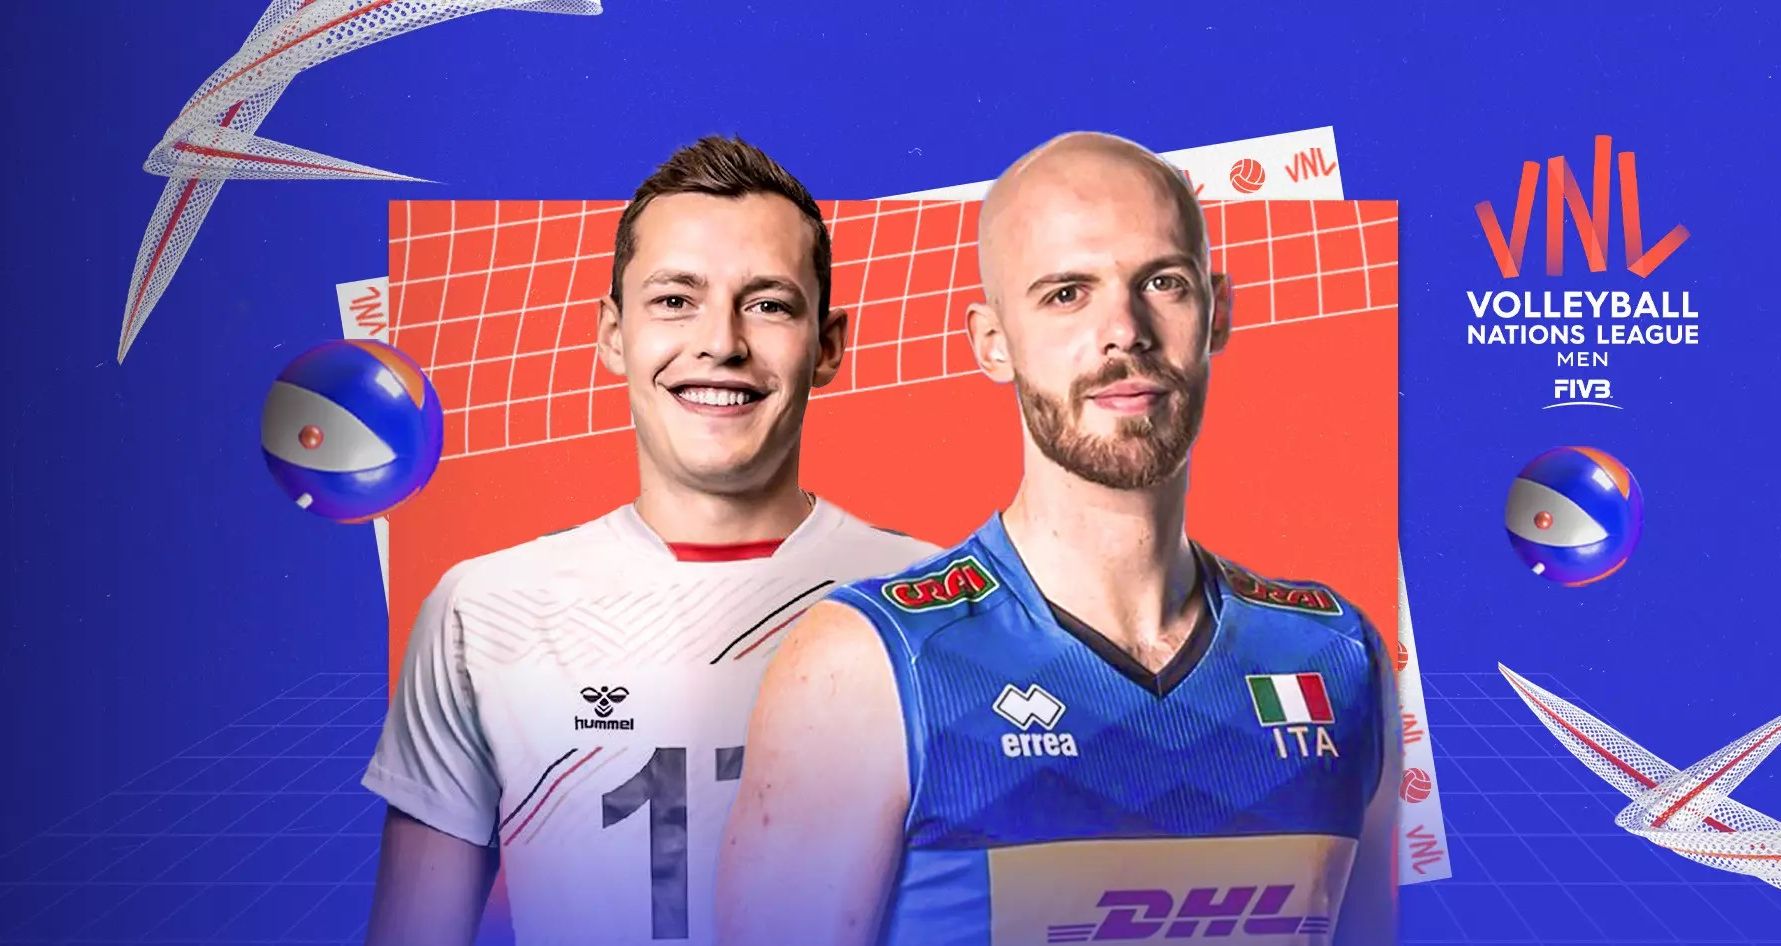 LINK LIVE STREAMING Mens Volleyball Nations League 2022 Duel Derby All Eropa Jerman vs Italia